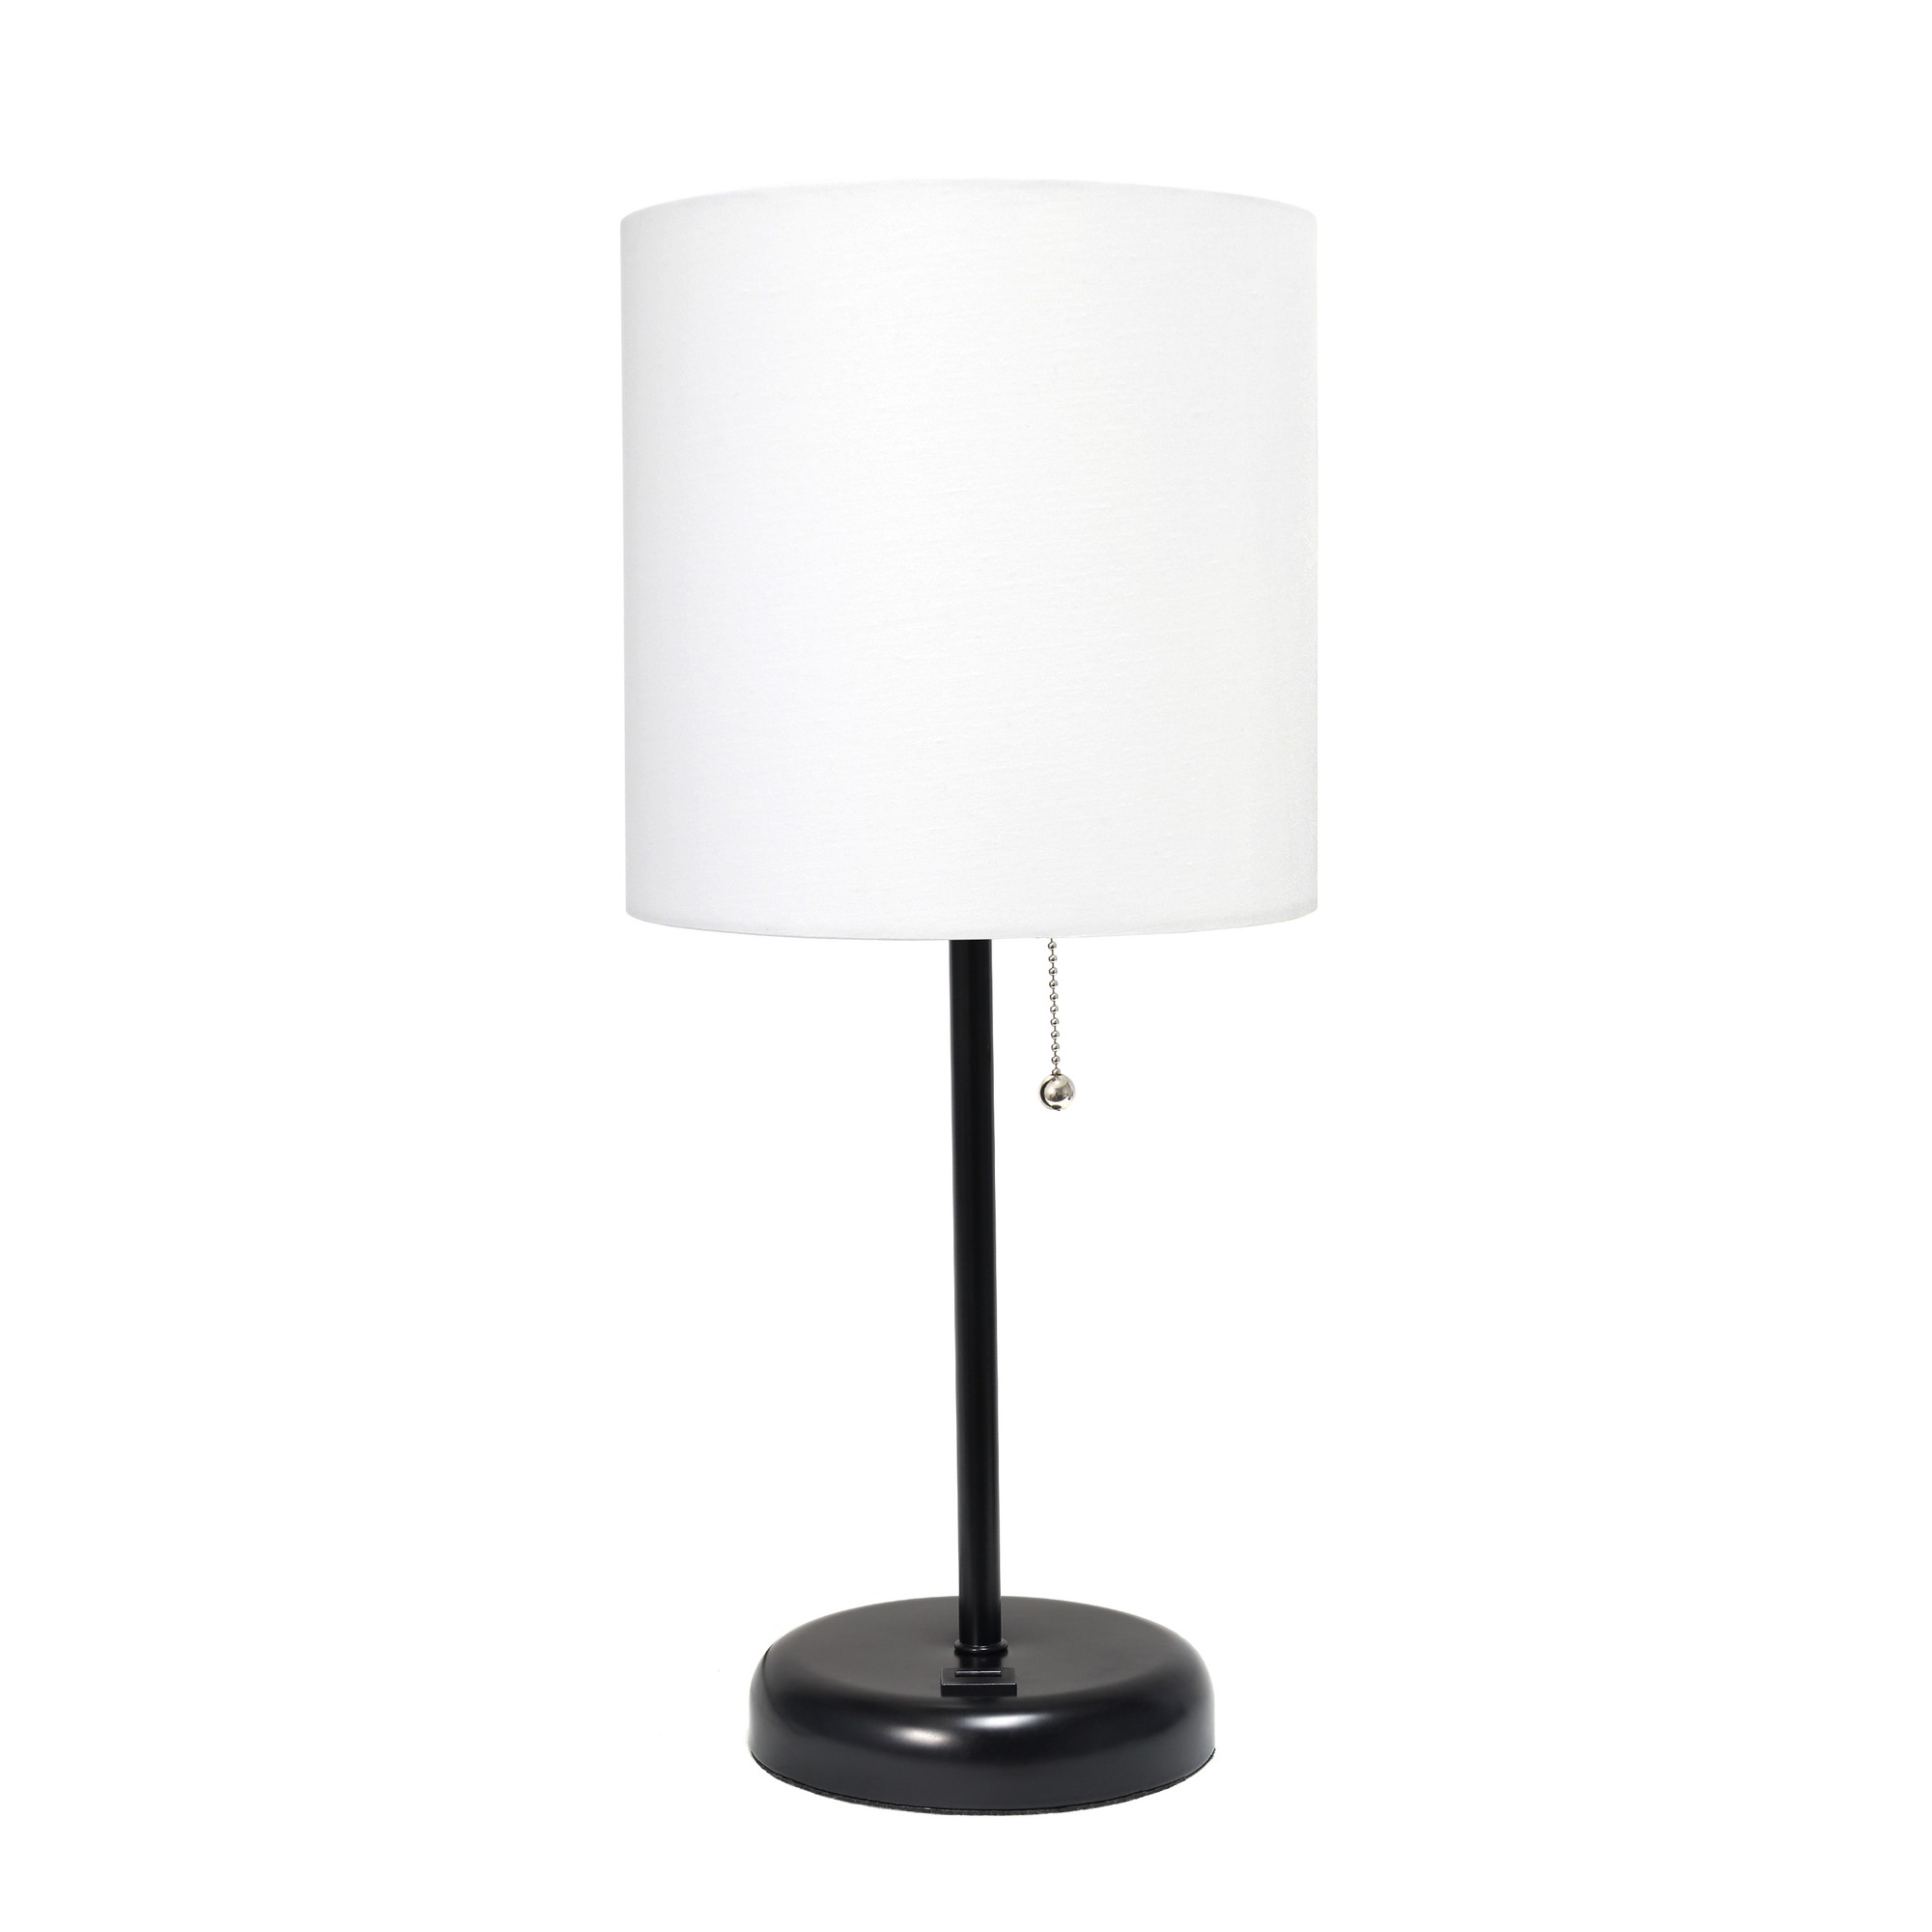 Simple Designs Black Stick Lamp with USB charging port and Fabric Shade, White